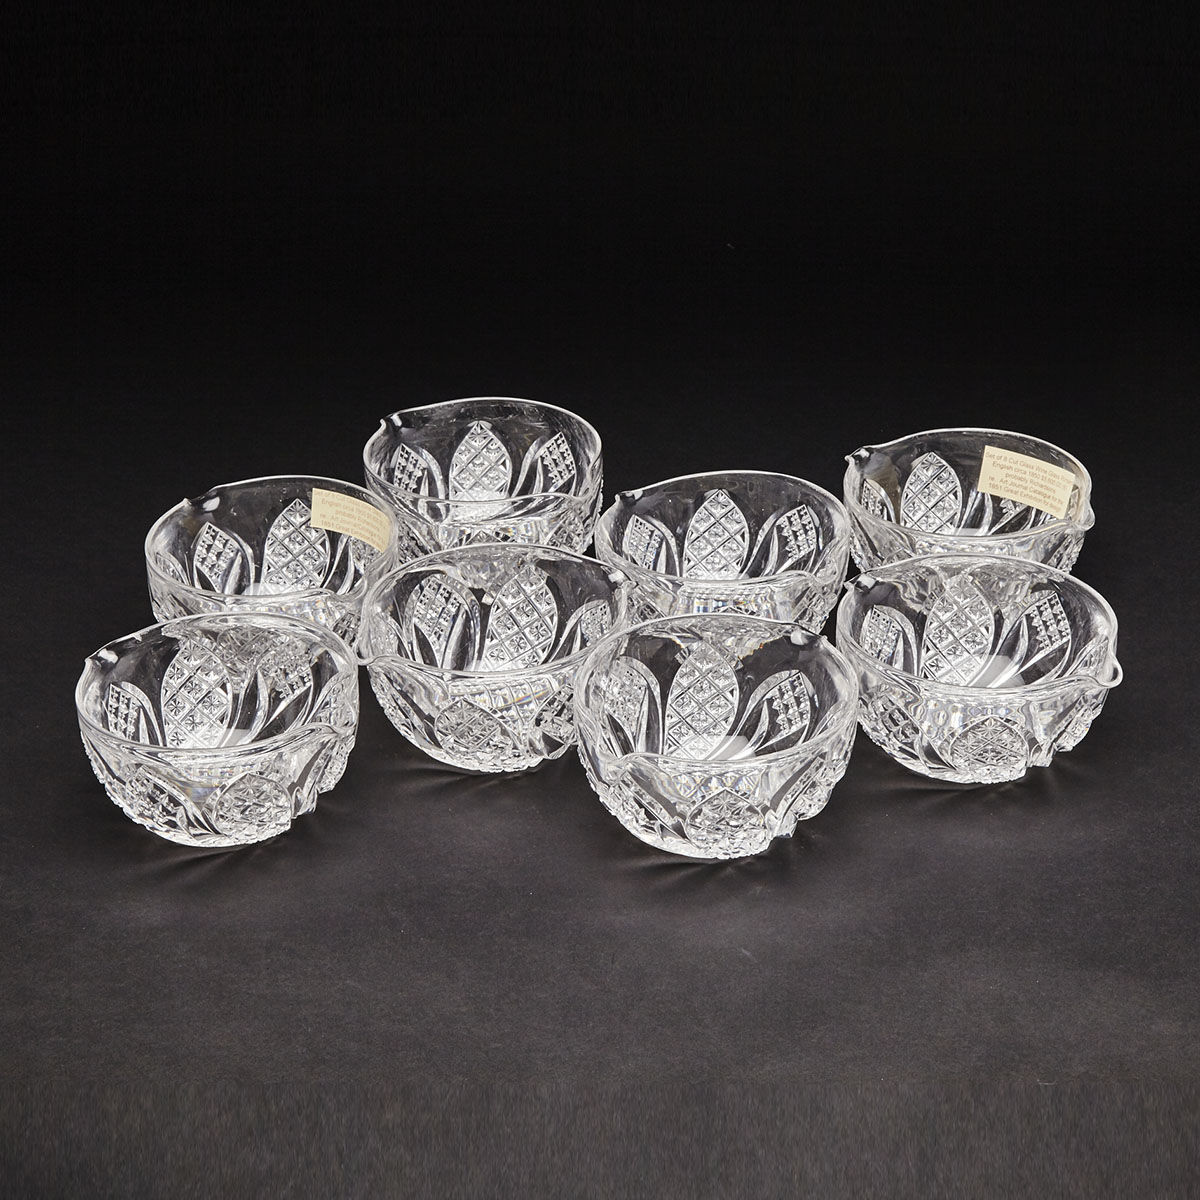 Set of Eight Cut Glass Wine Glass Rinsers, c.1850